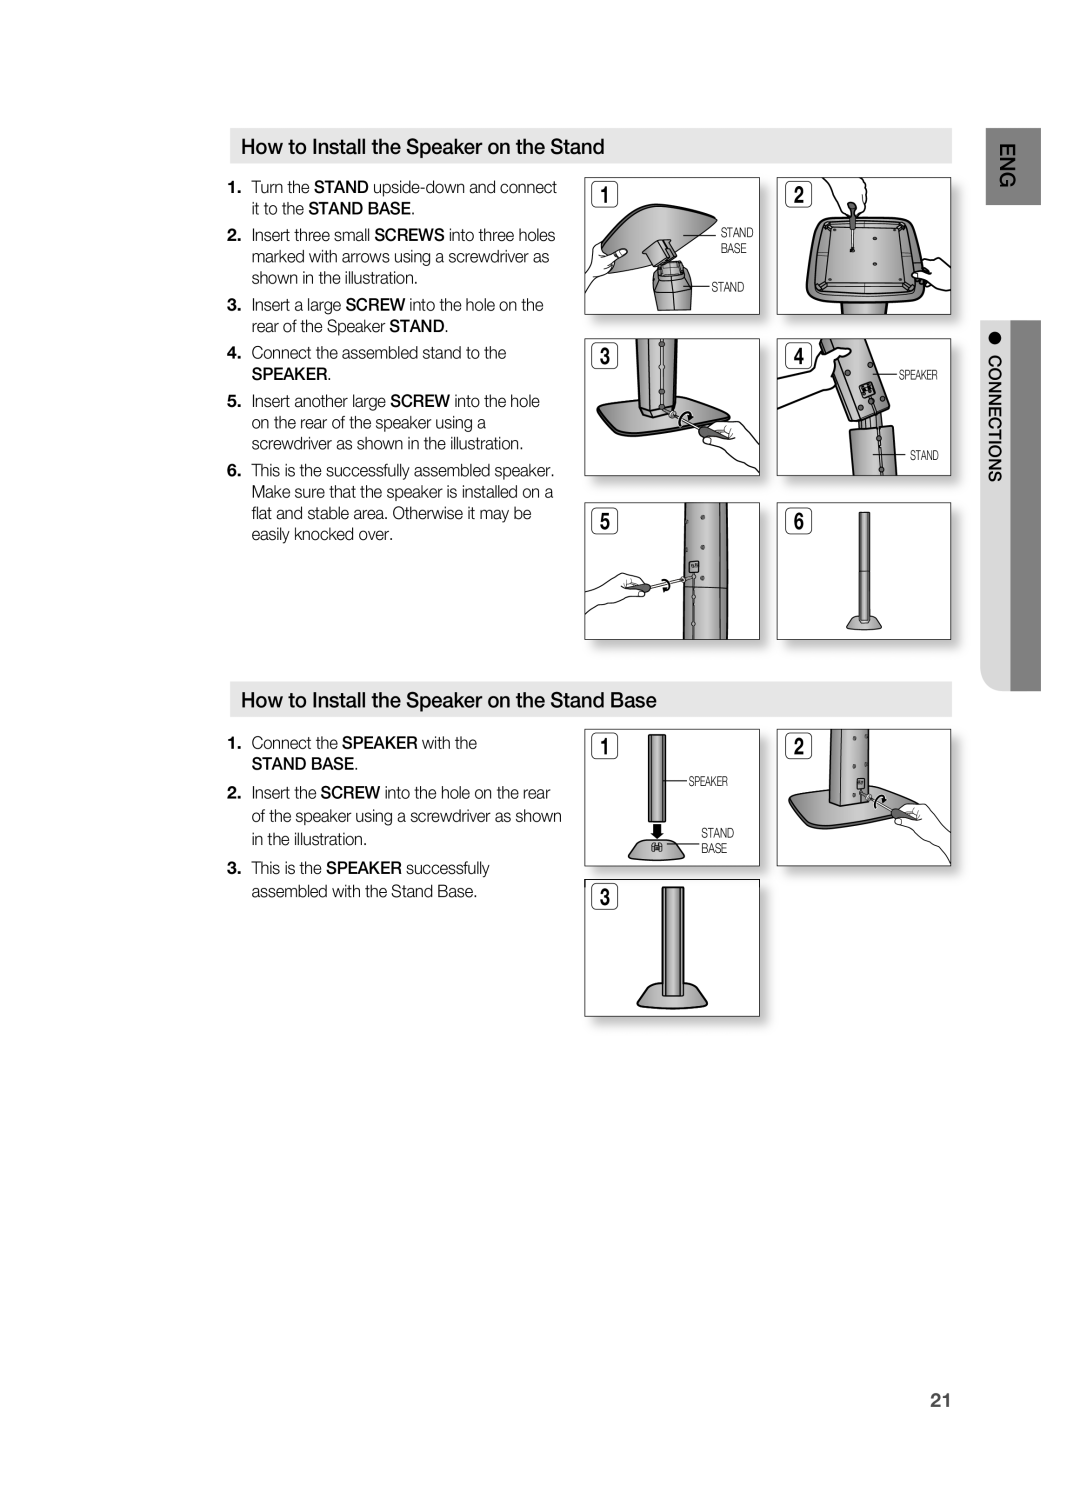 Samsung HT-TZ515 user manual How to Install the Speaker on the Stand Base 